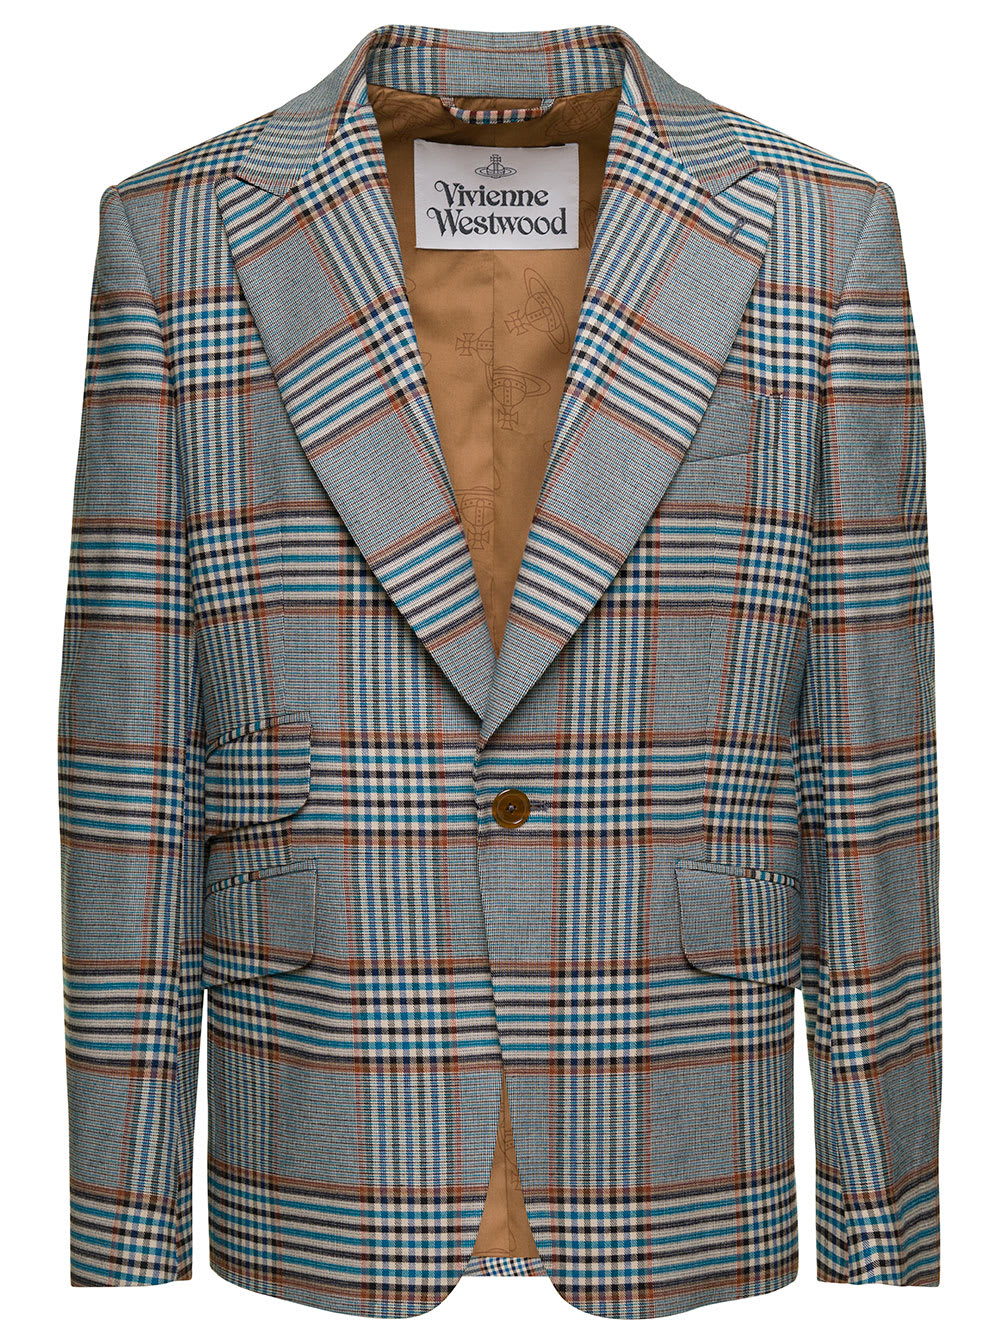 VIVIENNE WESTWOOD GREY SINGLE-BREASTED JACKET WITH CHECK MOTIF IN VISCOSE AND WOOL BLEND MAN